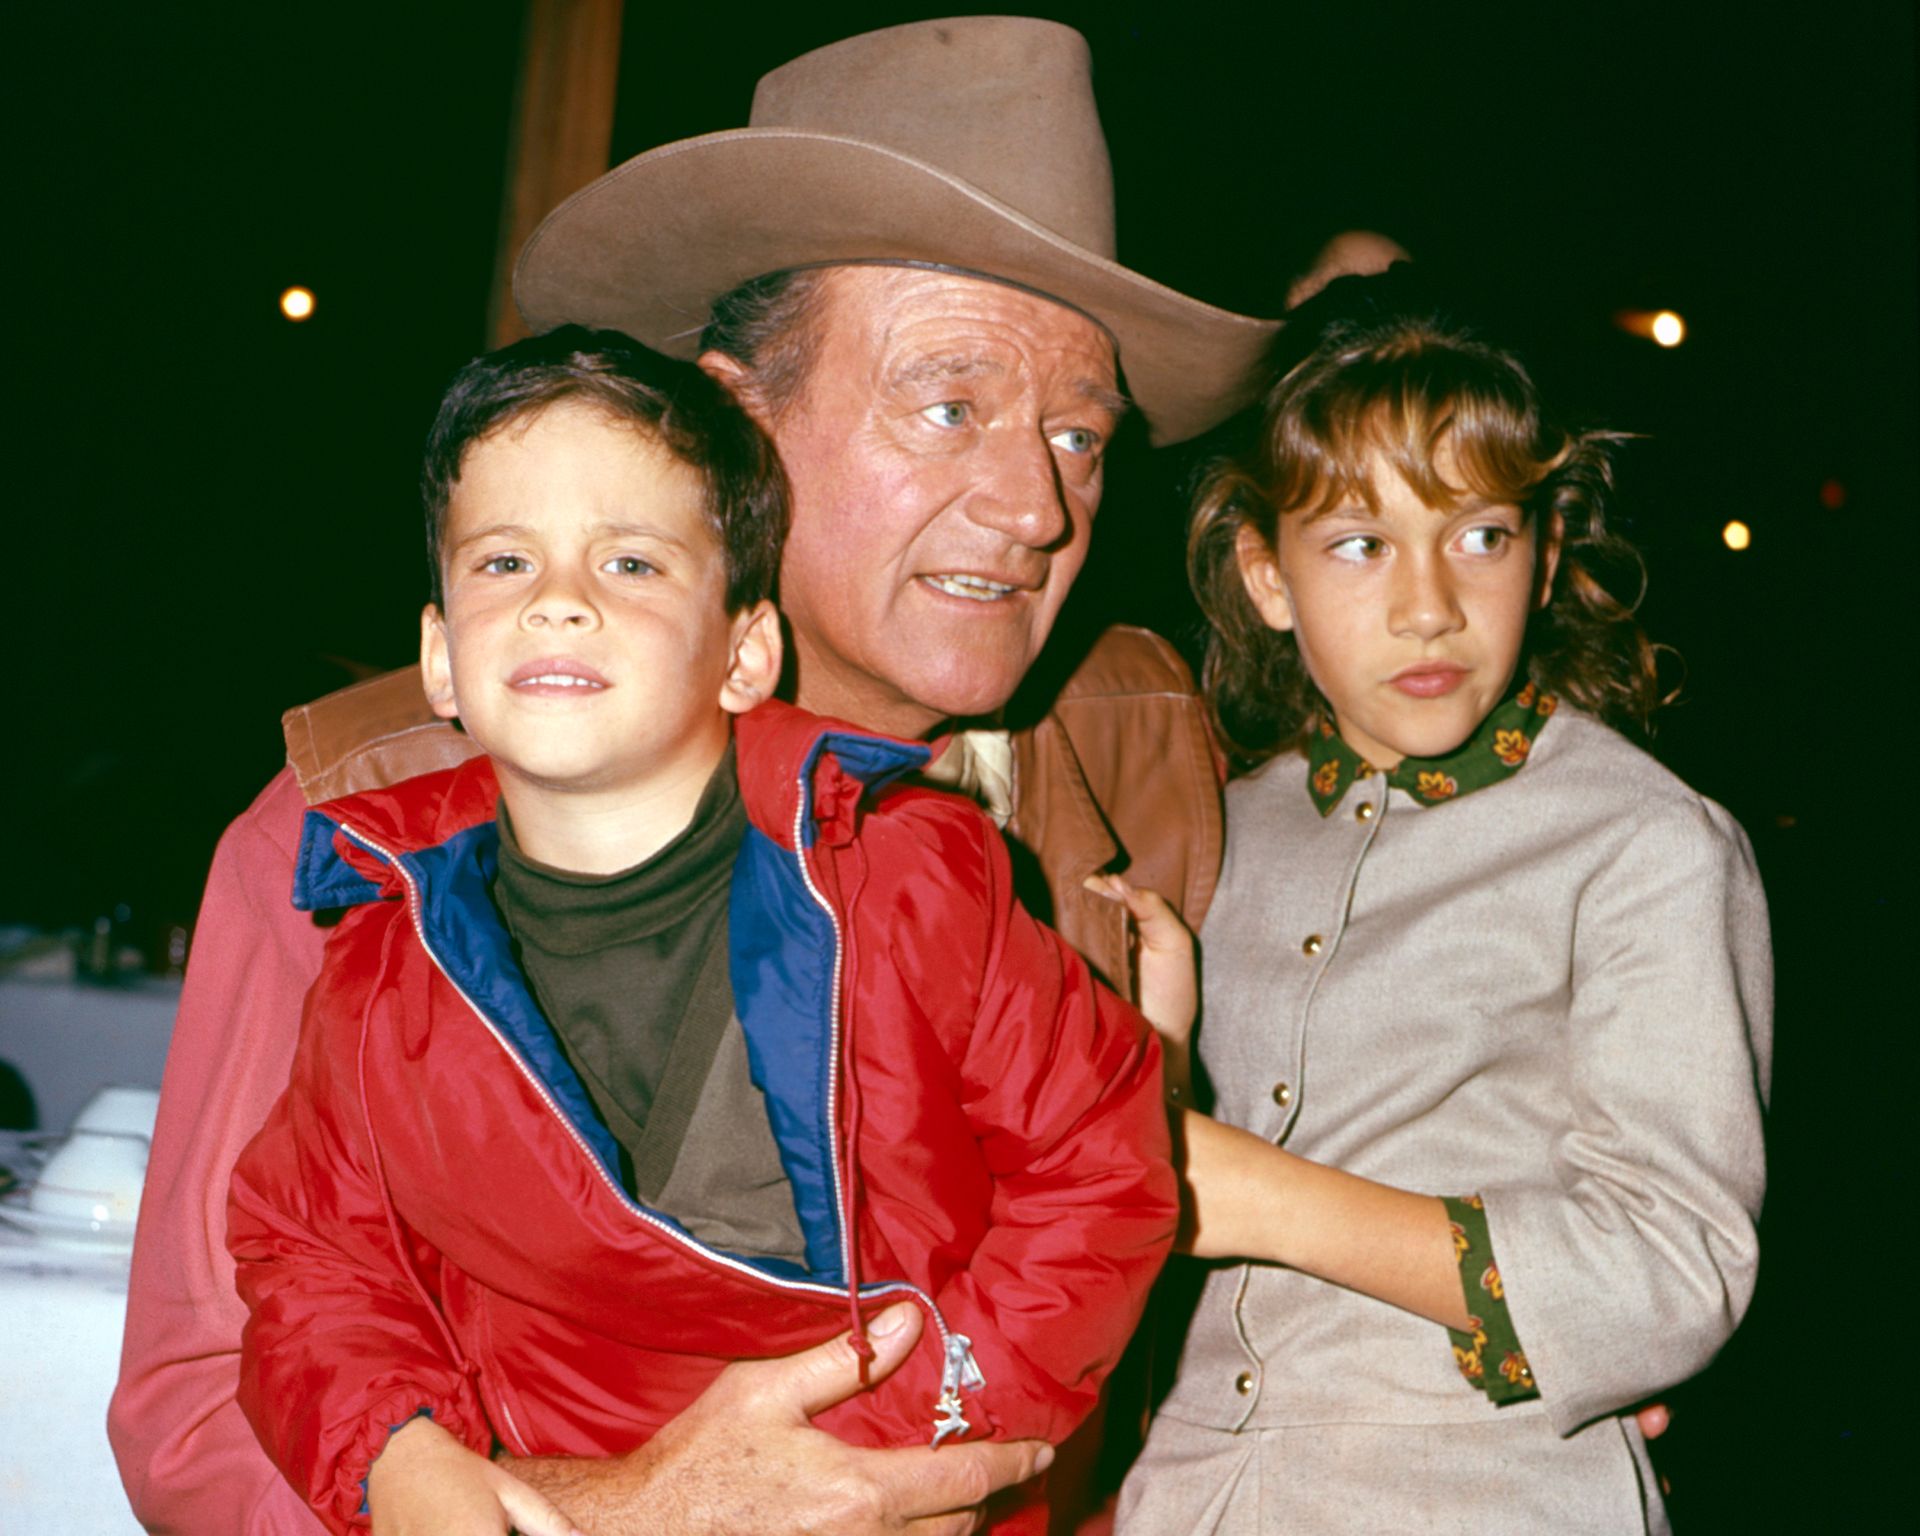 John Wayne and his two kids at a restaurant, circa 1967. | Source: Getty Images